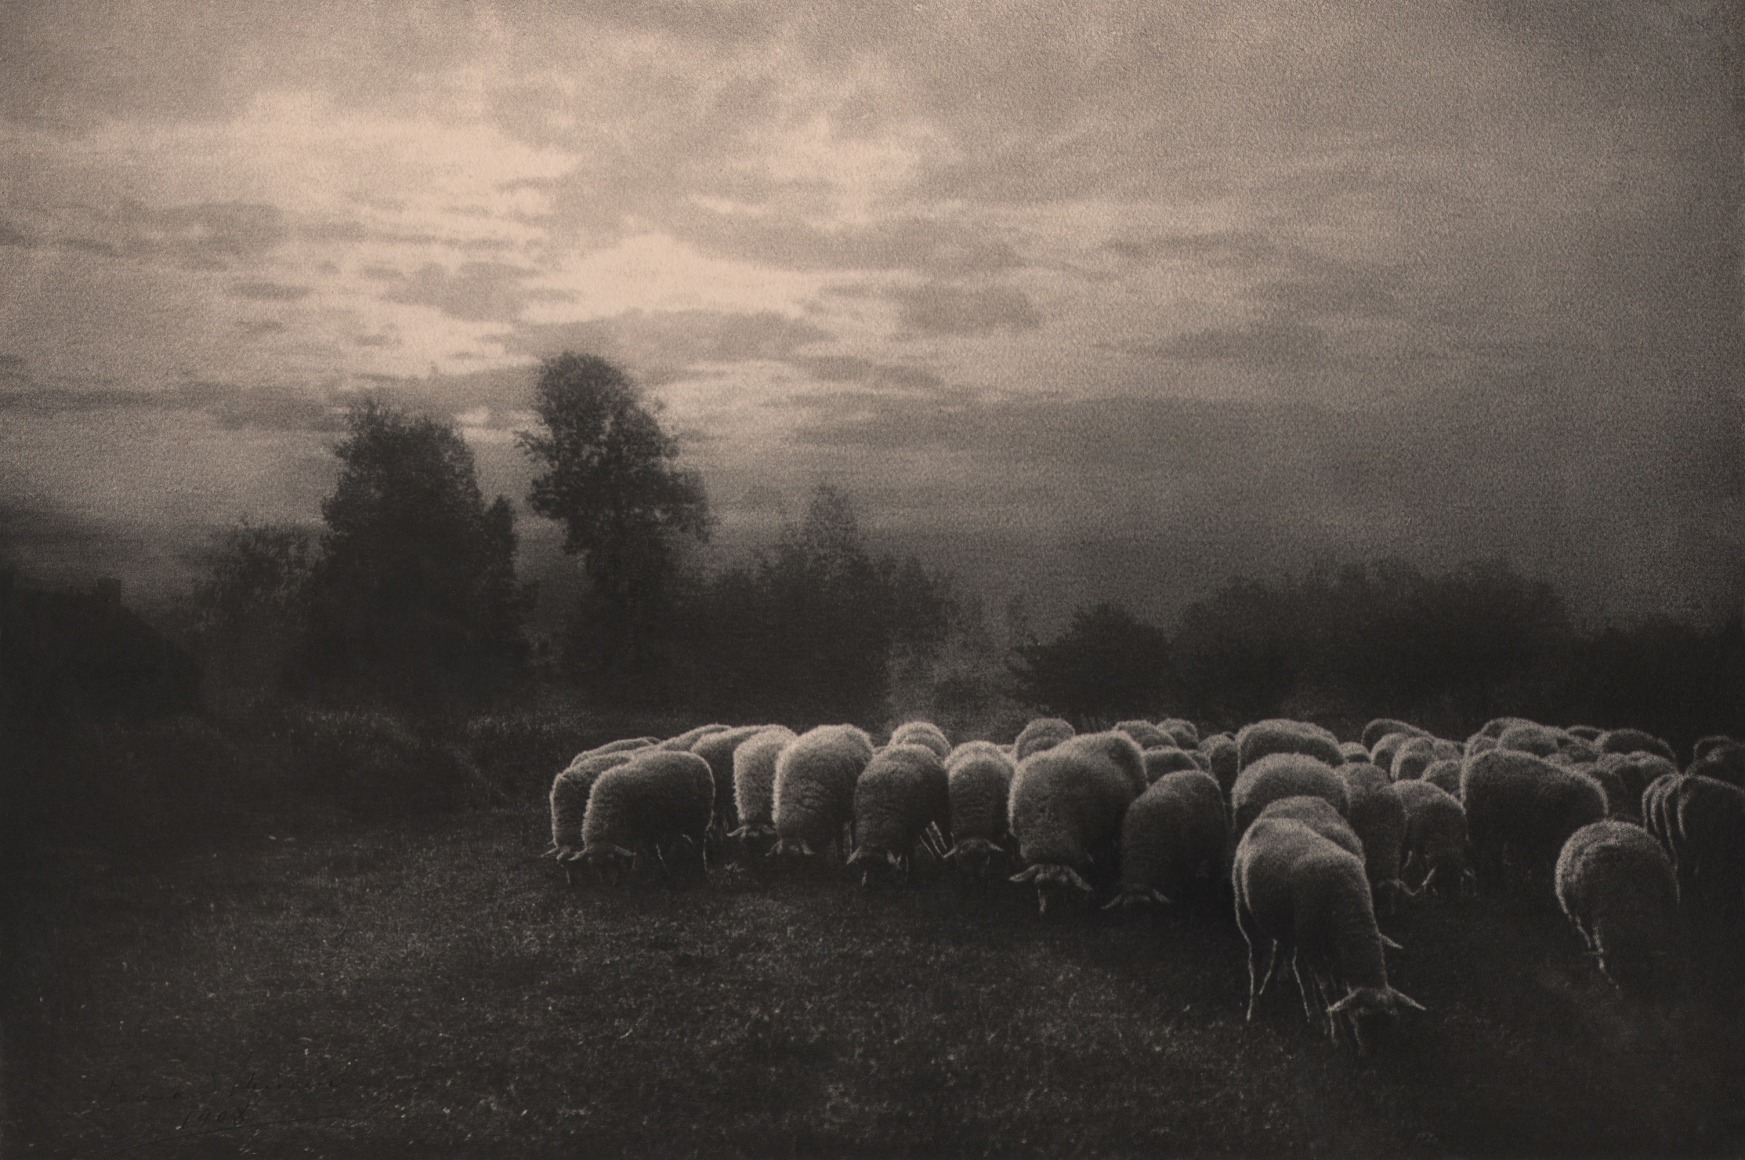 16. L&eacute;onard Misonne, Mouton au cr&egrave;puscule, 1908. Herd of sheep graze in the foreground against a backdrop of low trees and cloudy sky. Sepia-toned print.